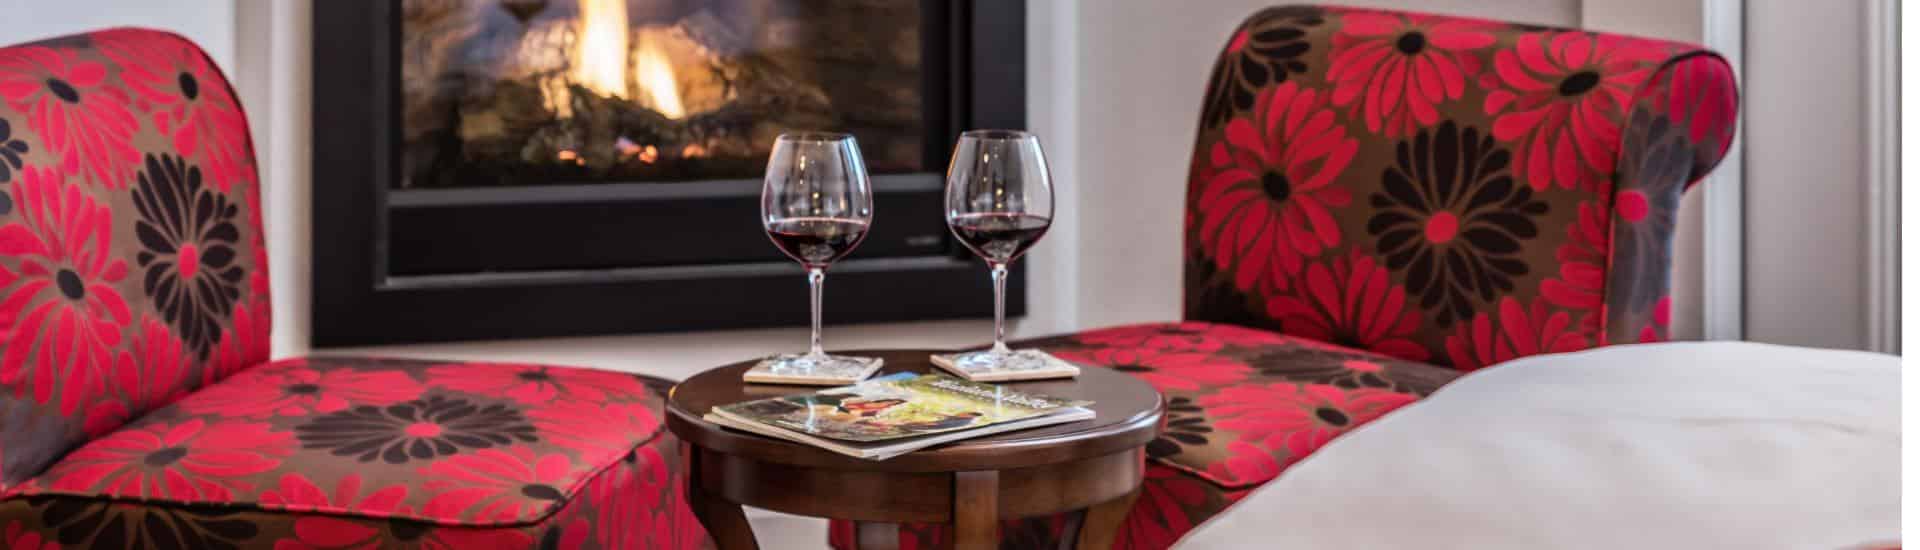 Close up view of two glasses of red wine on a small wooden table near two upholstered chairs with a red and black flower print and fireplace in the background